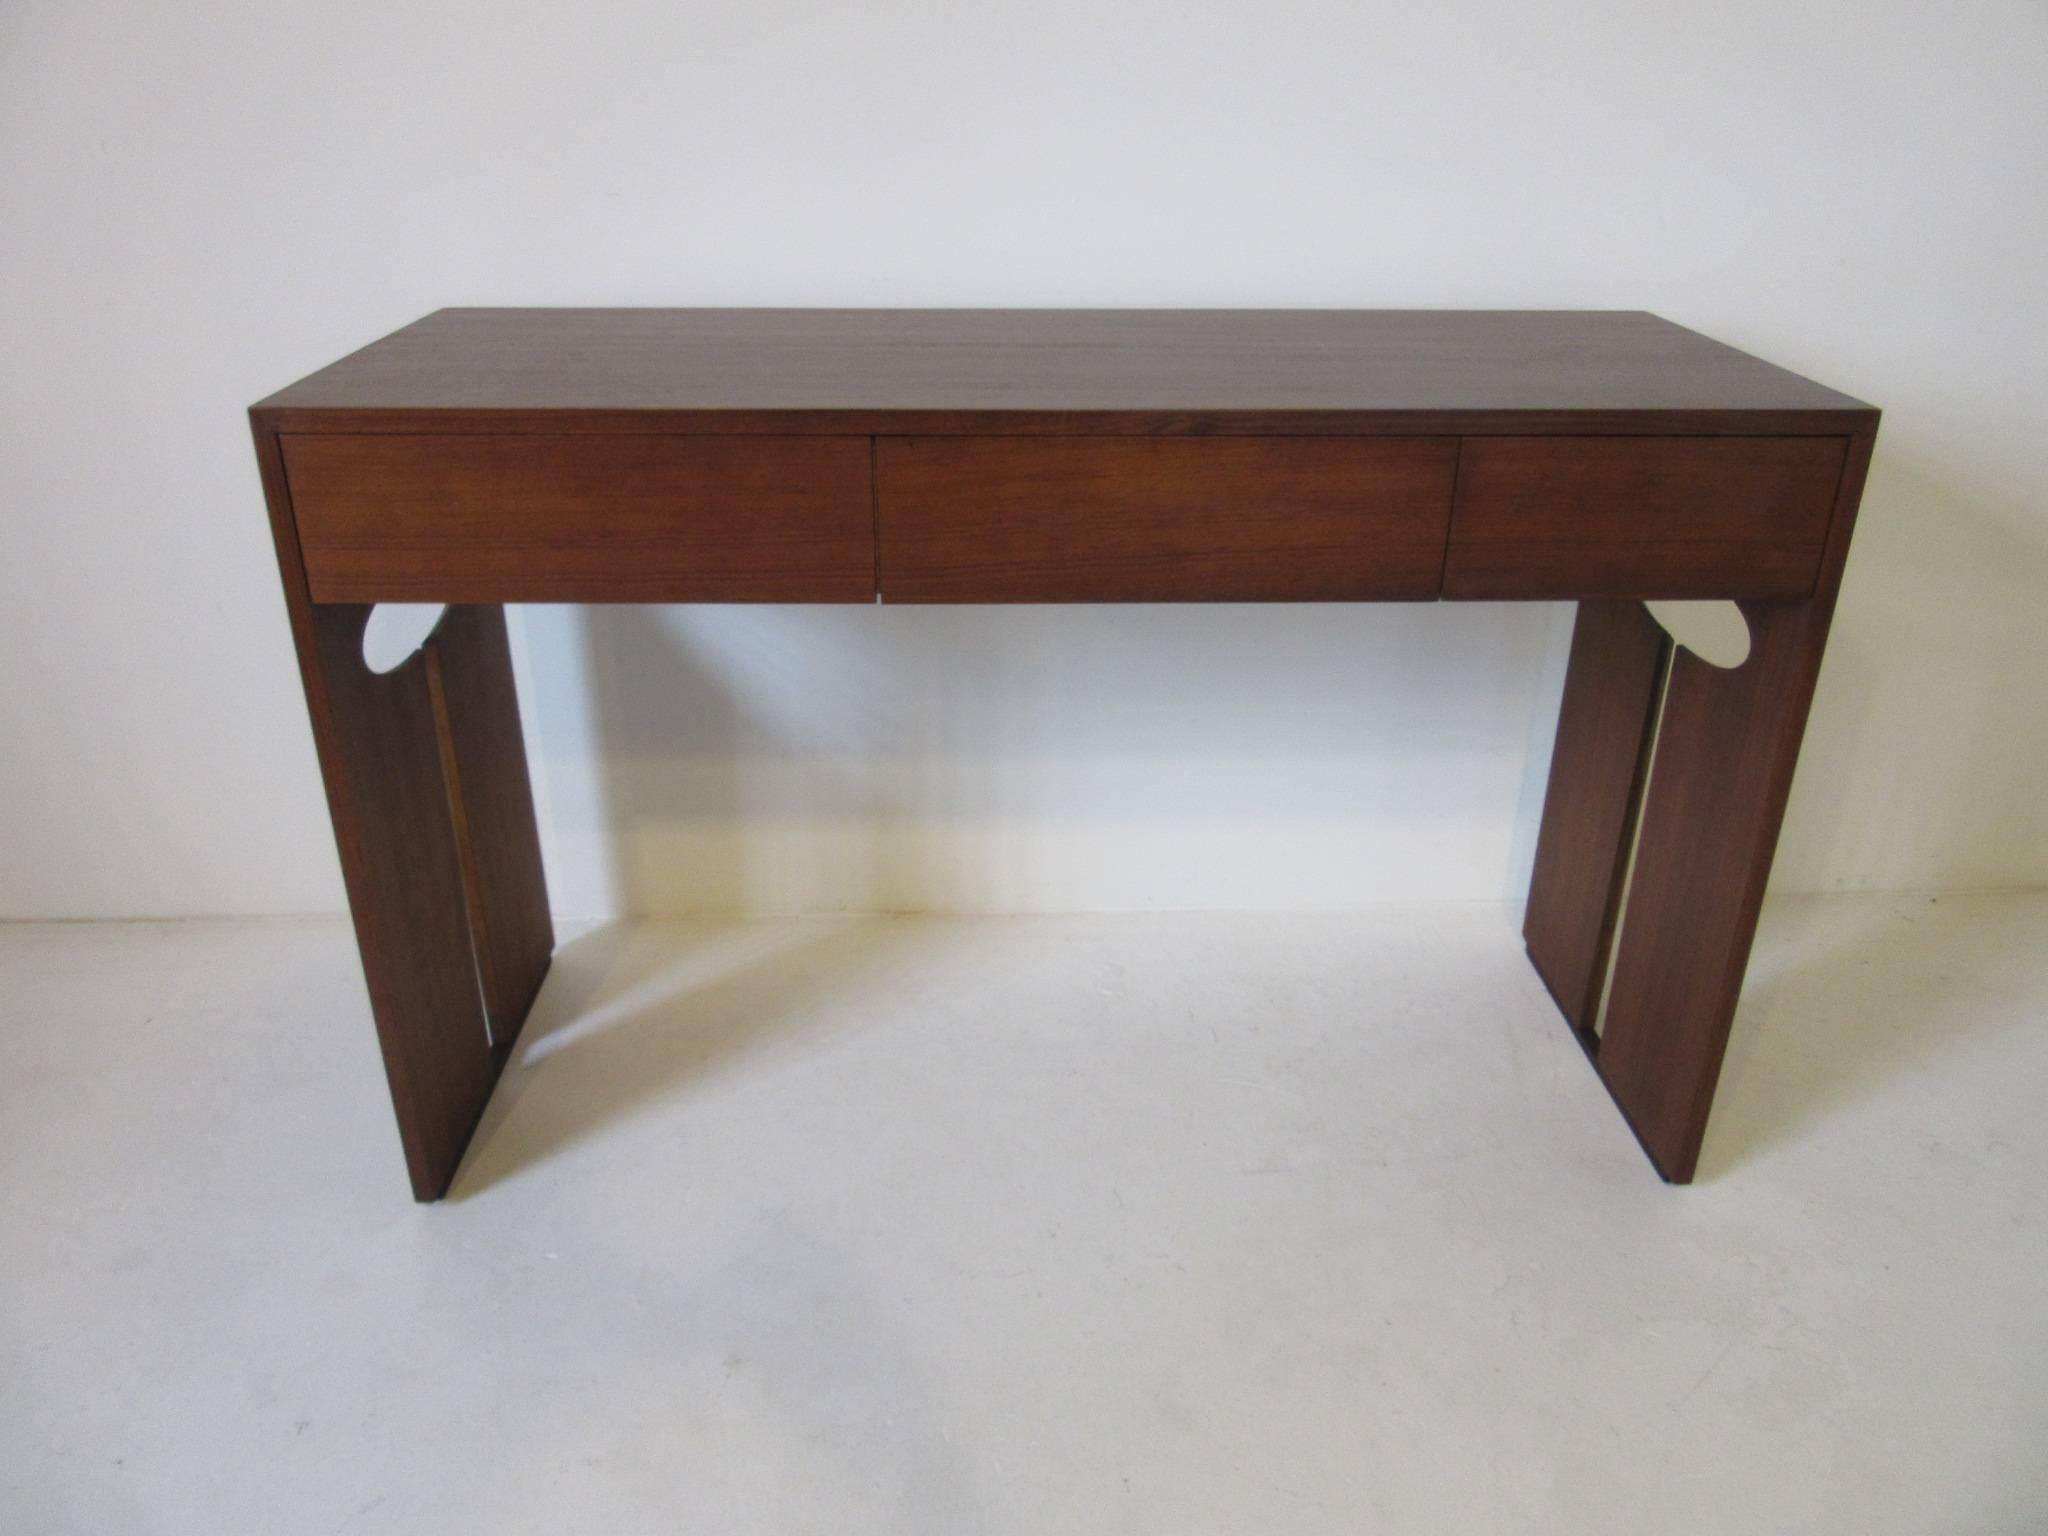 A smaller sized dark walnut desk with three drawers and legs with key hole cut-out design, perfect for a tight space with a modern look and designed in the style of Henry P. Glass.